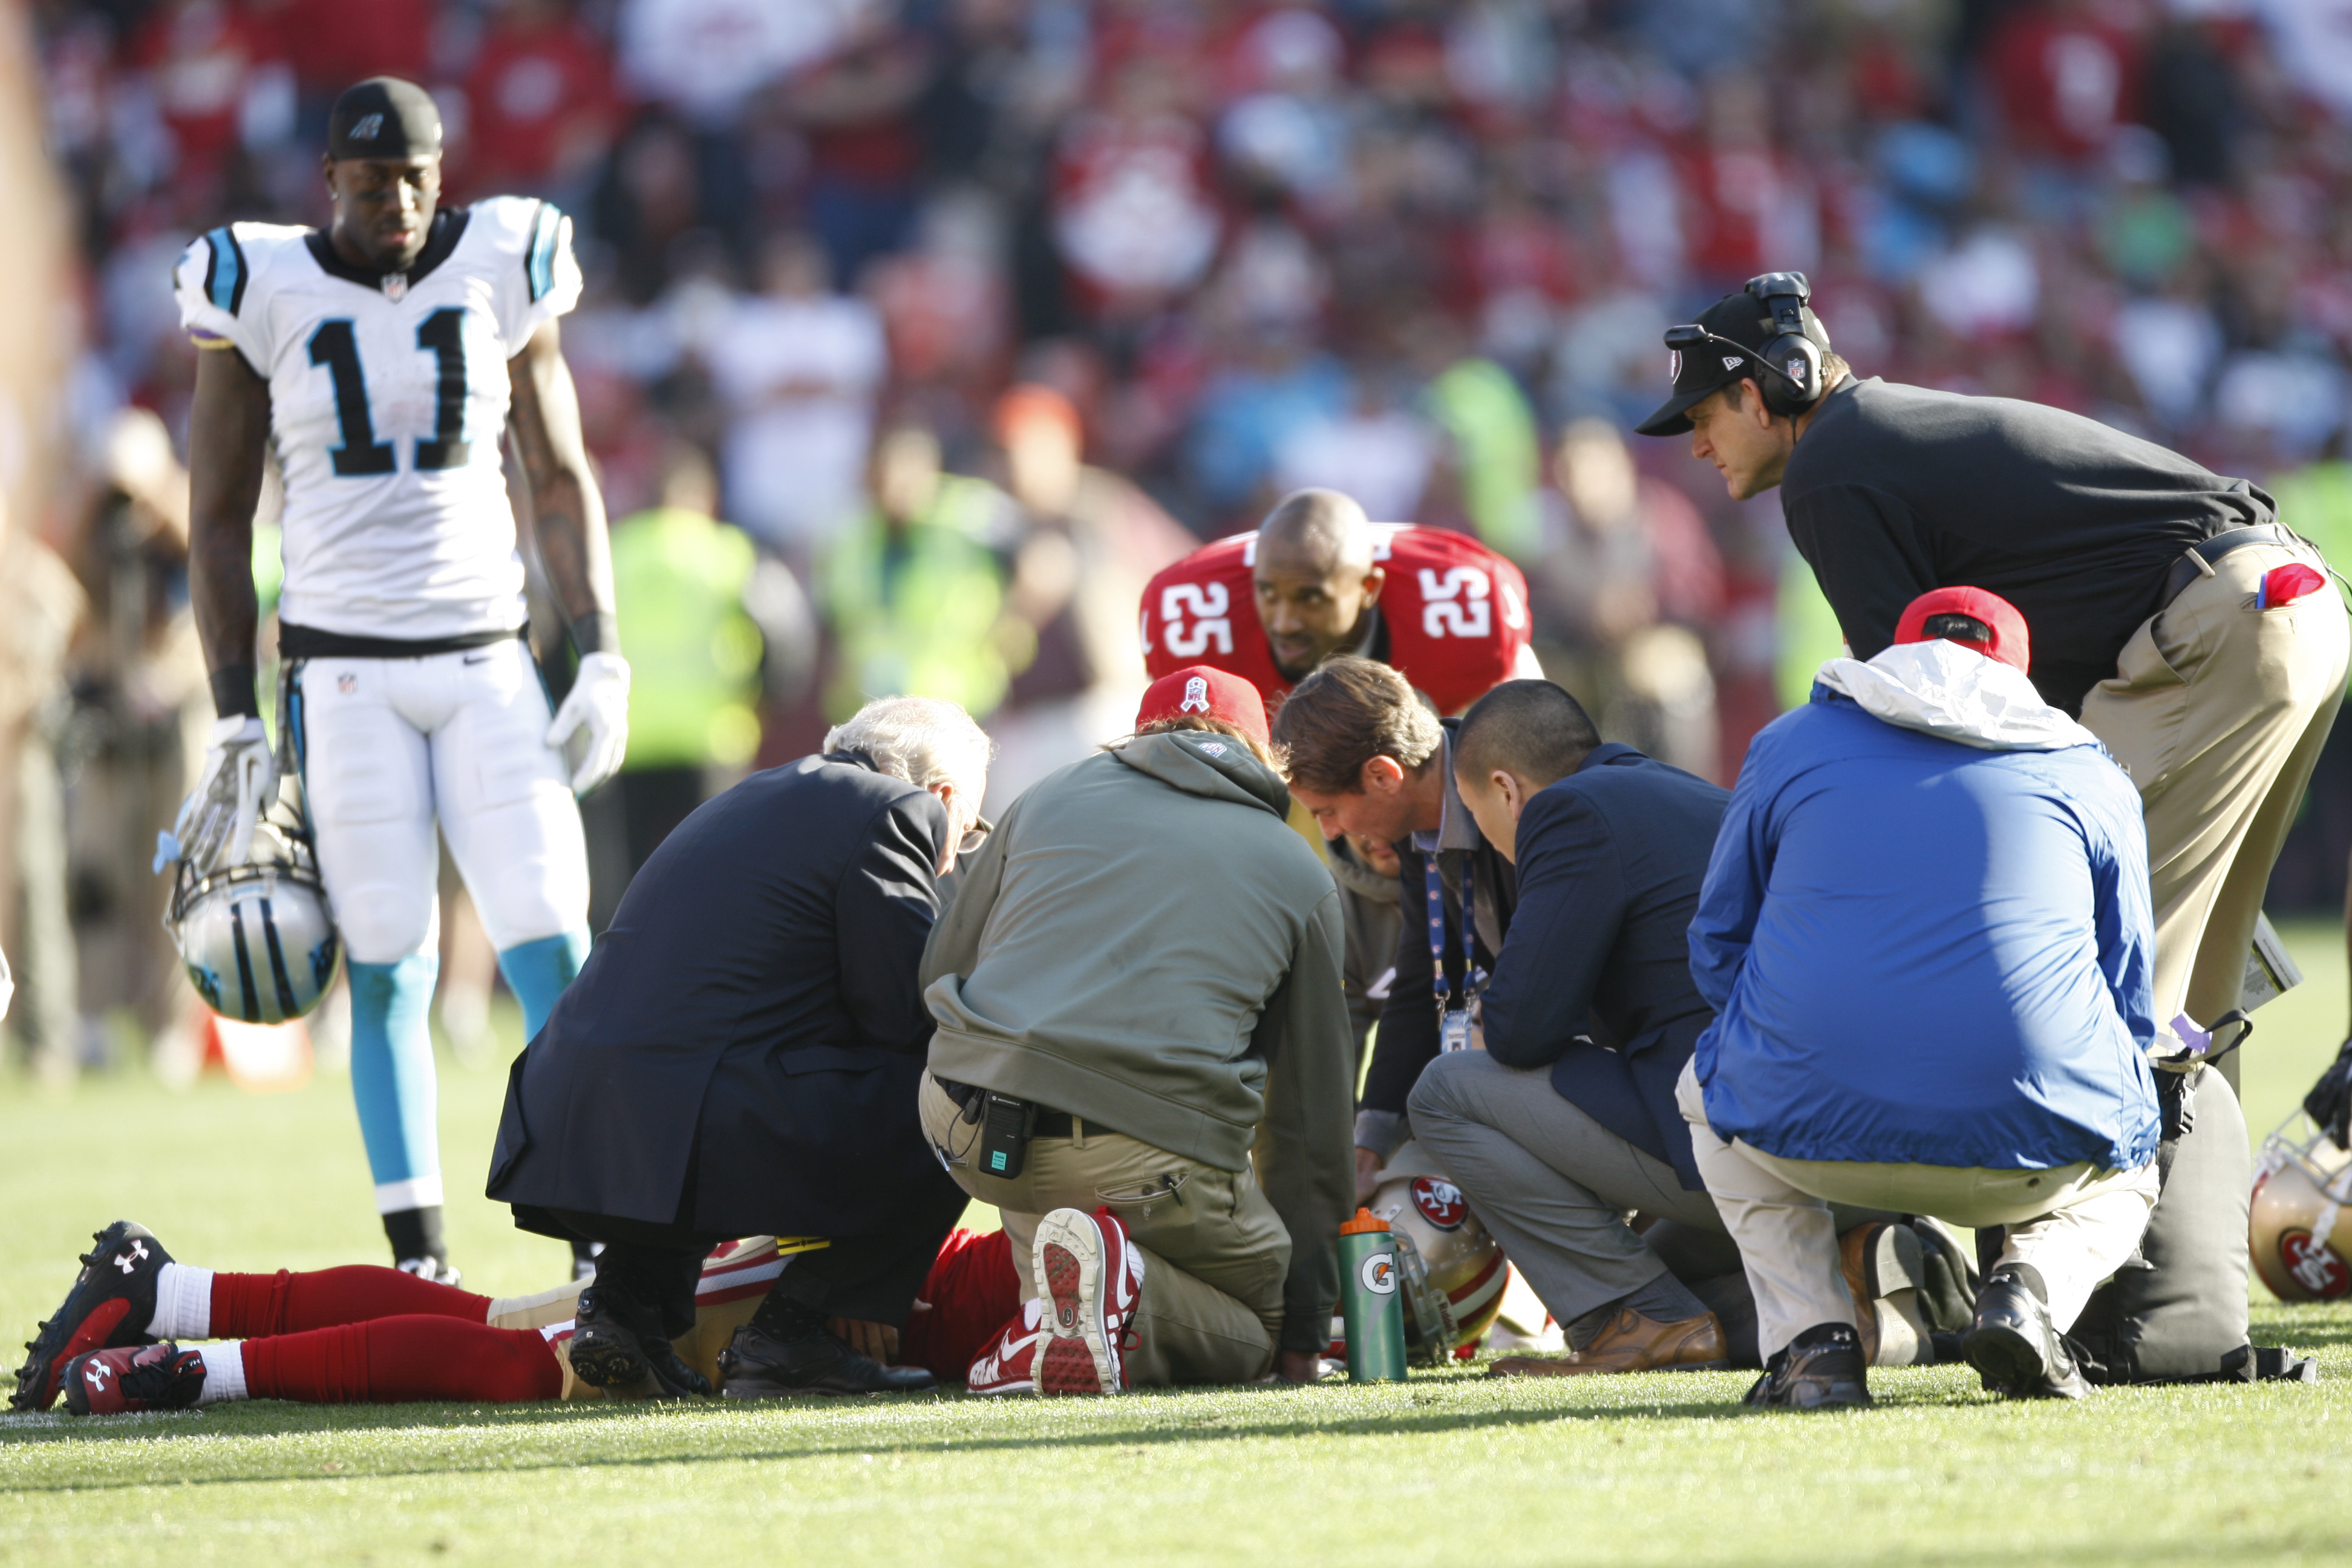 From left: Head Coach Jim Harbaugh of the San Francisco 49ers and the medical staff check out Eric Reid after he received a concussion during the game against the Carolina Panthers on November 10, 2013 in San Francisco, California. (Michael Zagaris—Getty Images)